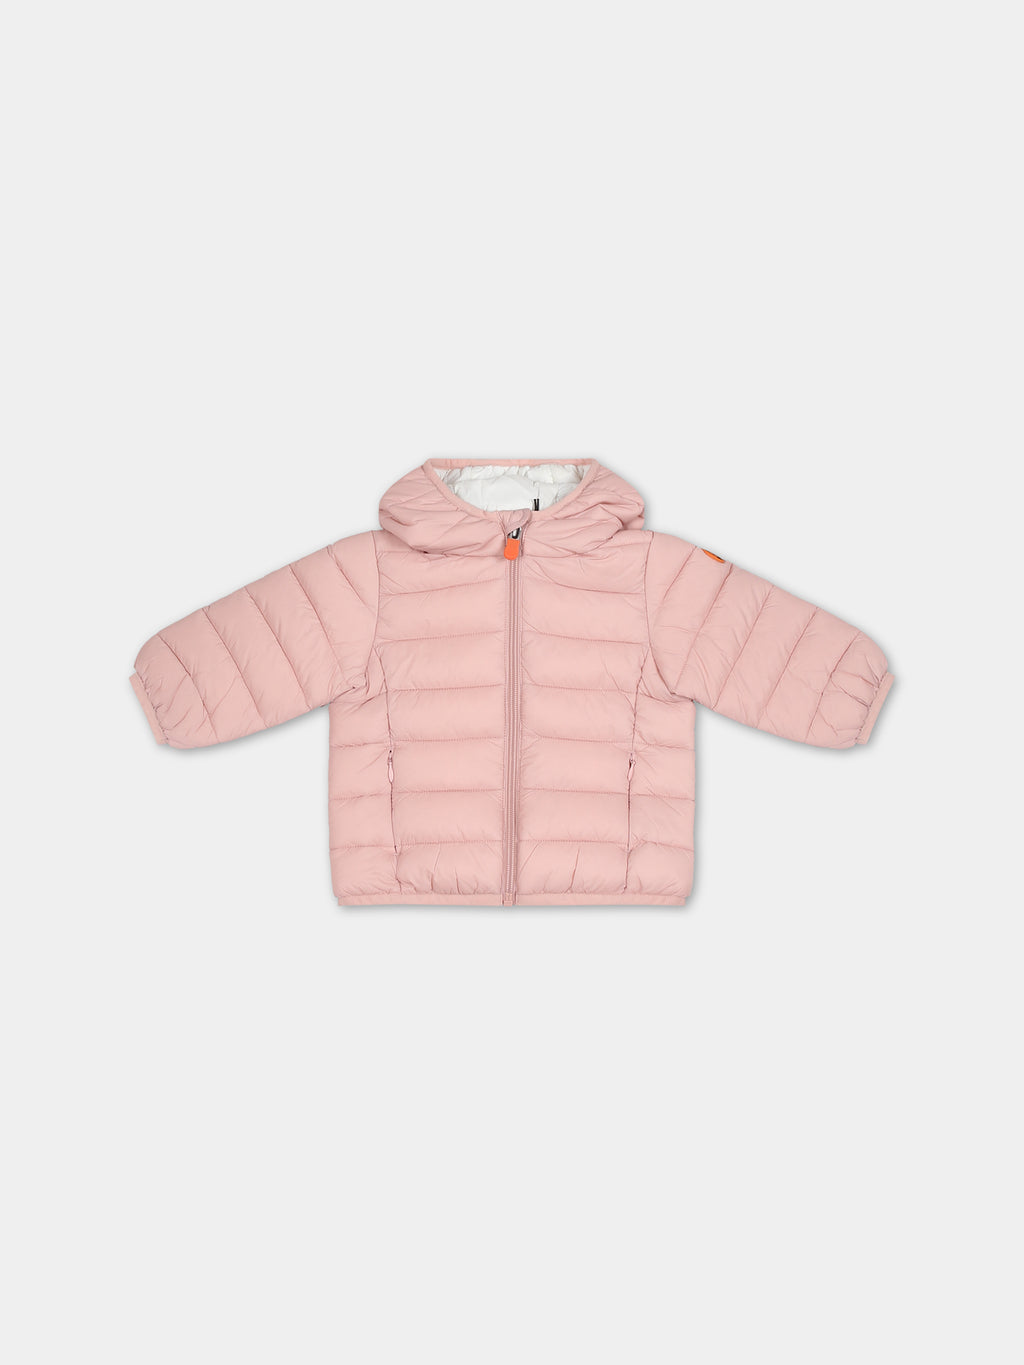 Pink jacket for baby girl with logo